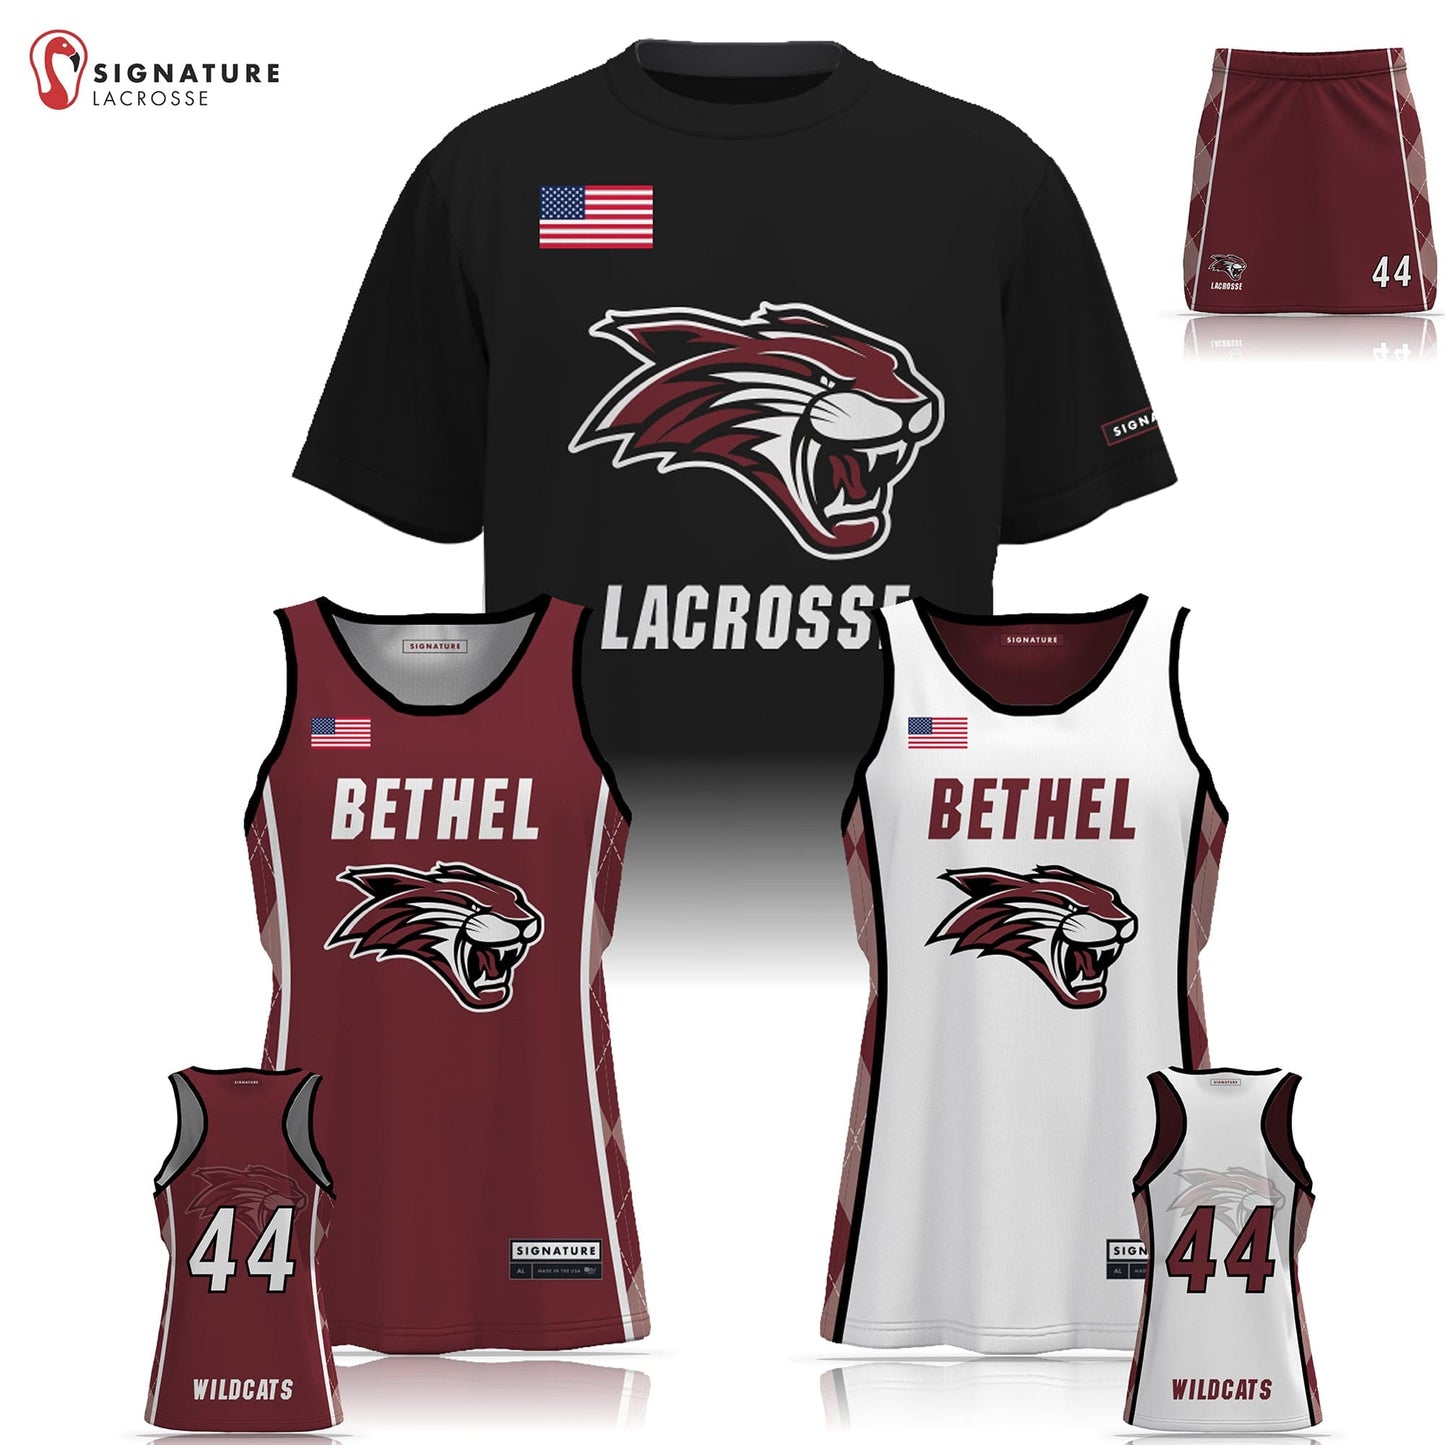 Bethel Youth Lacrosse Women's 3 Piece Game Package - Basic 2.0 - S/S Shooter Shirt:Girls Returning Players Signature Lacrosse